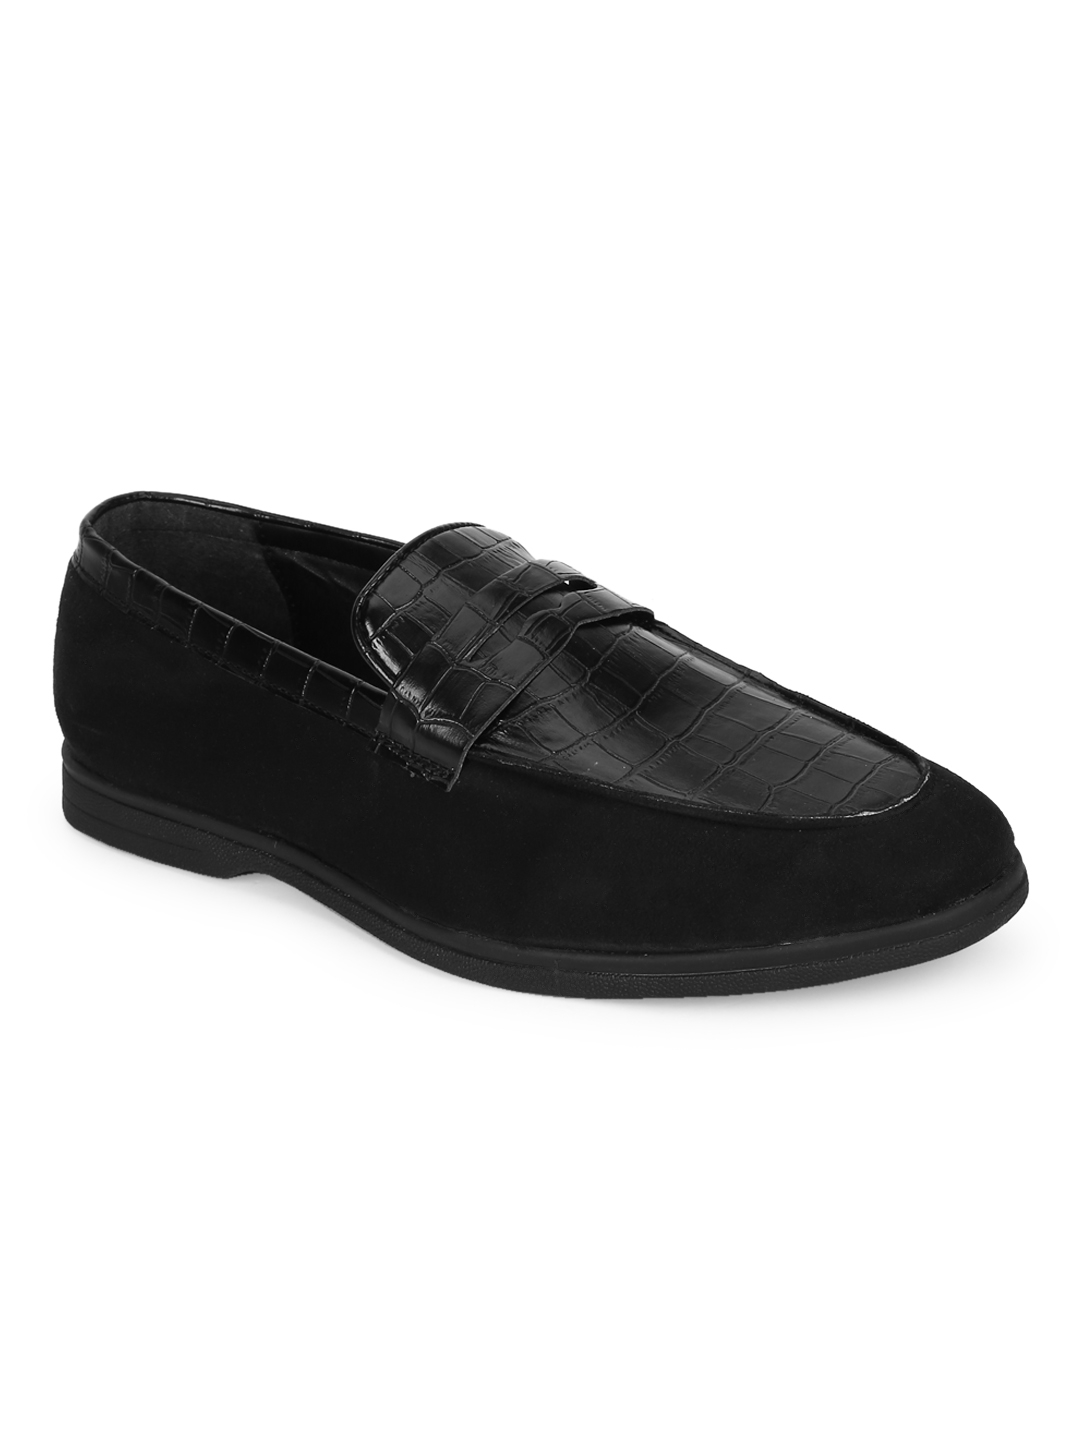 Truffle Collection | Black PU Croc Pattern Men's Loafers